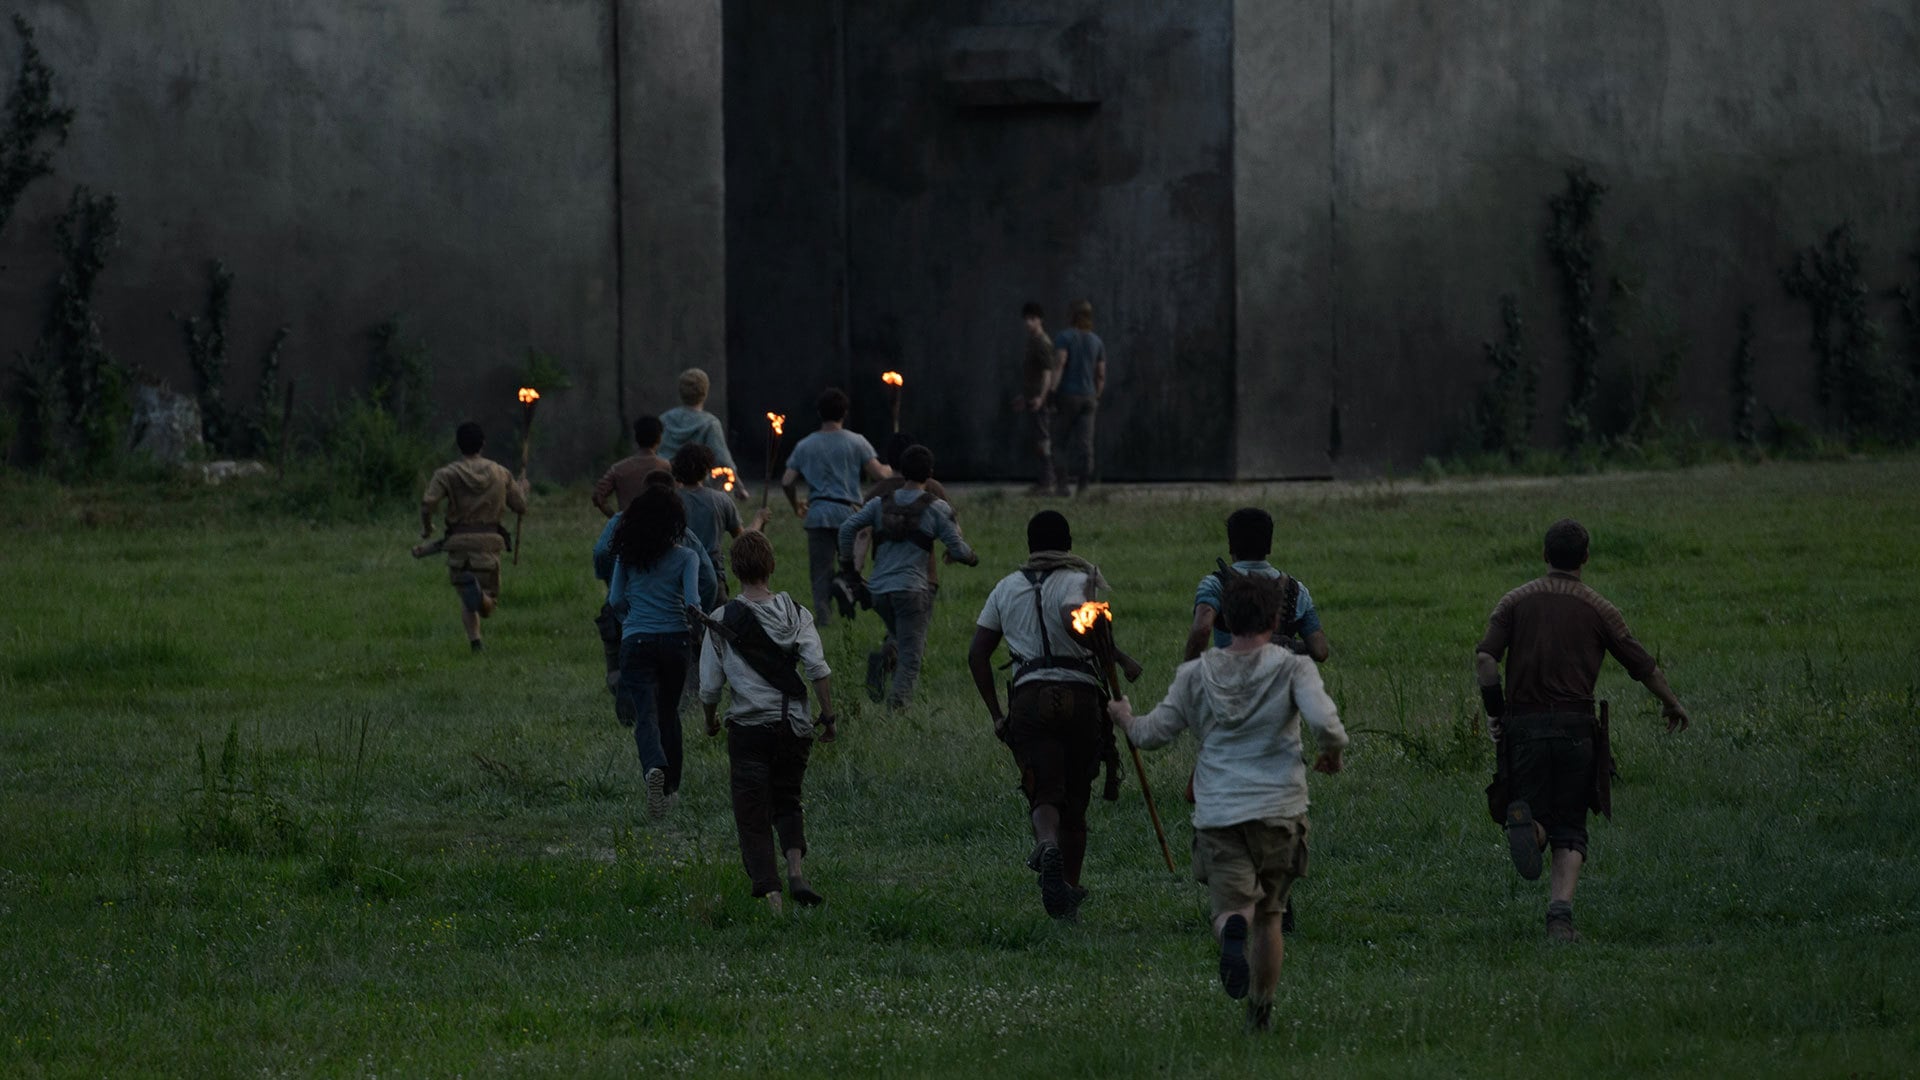 Maze Runner' doesn't move fast enough